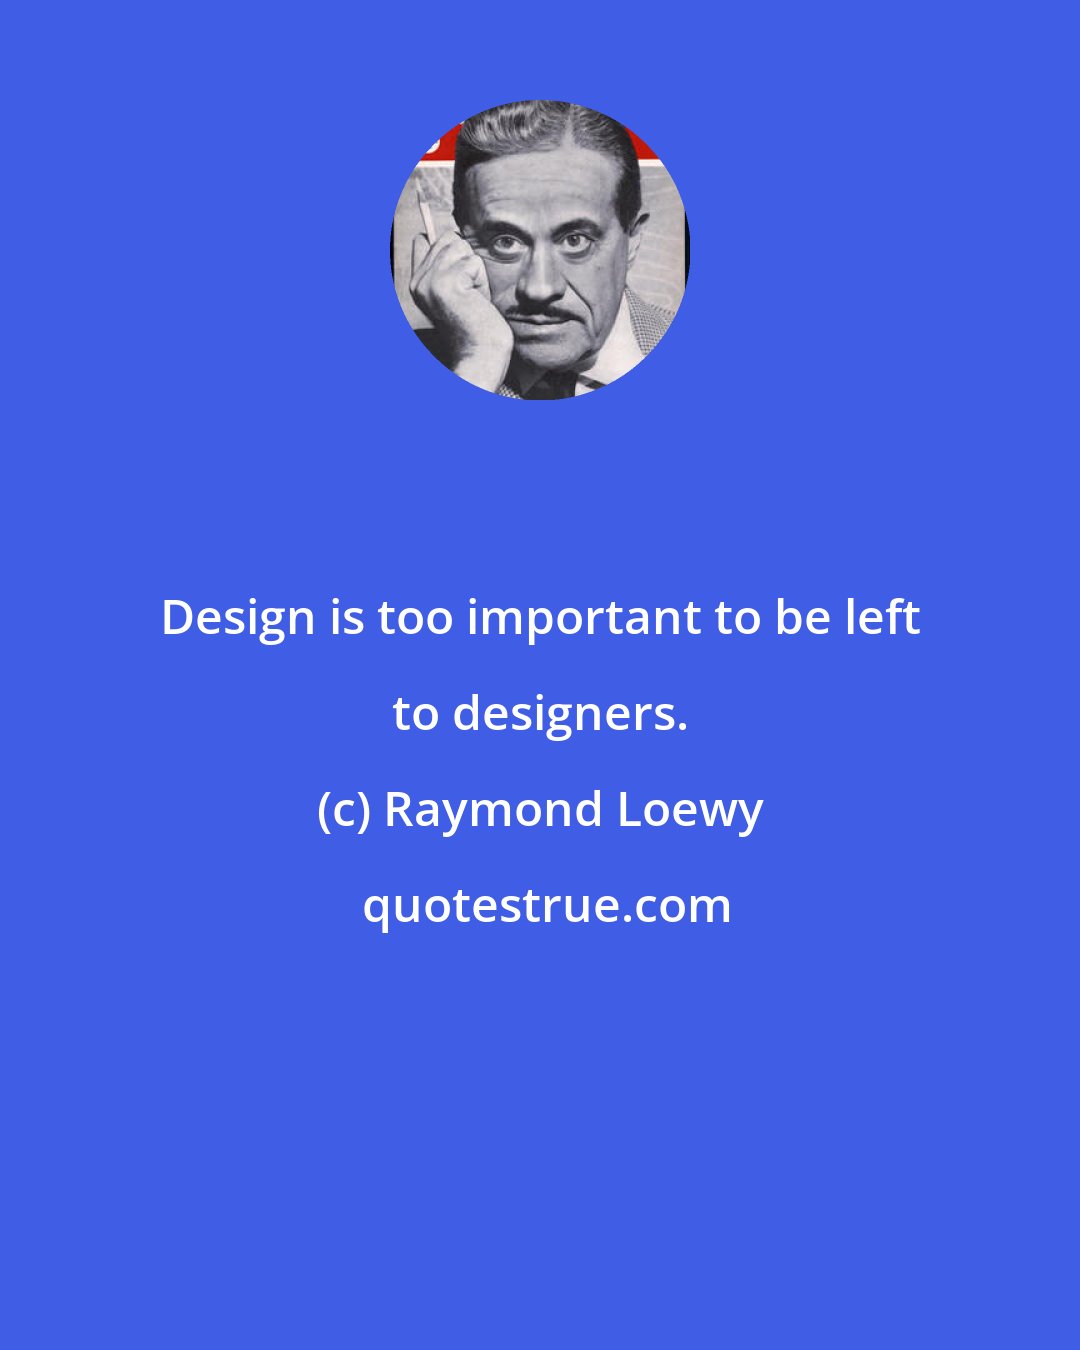 Raymond Loewy: Design is too important to be left to designers.